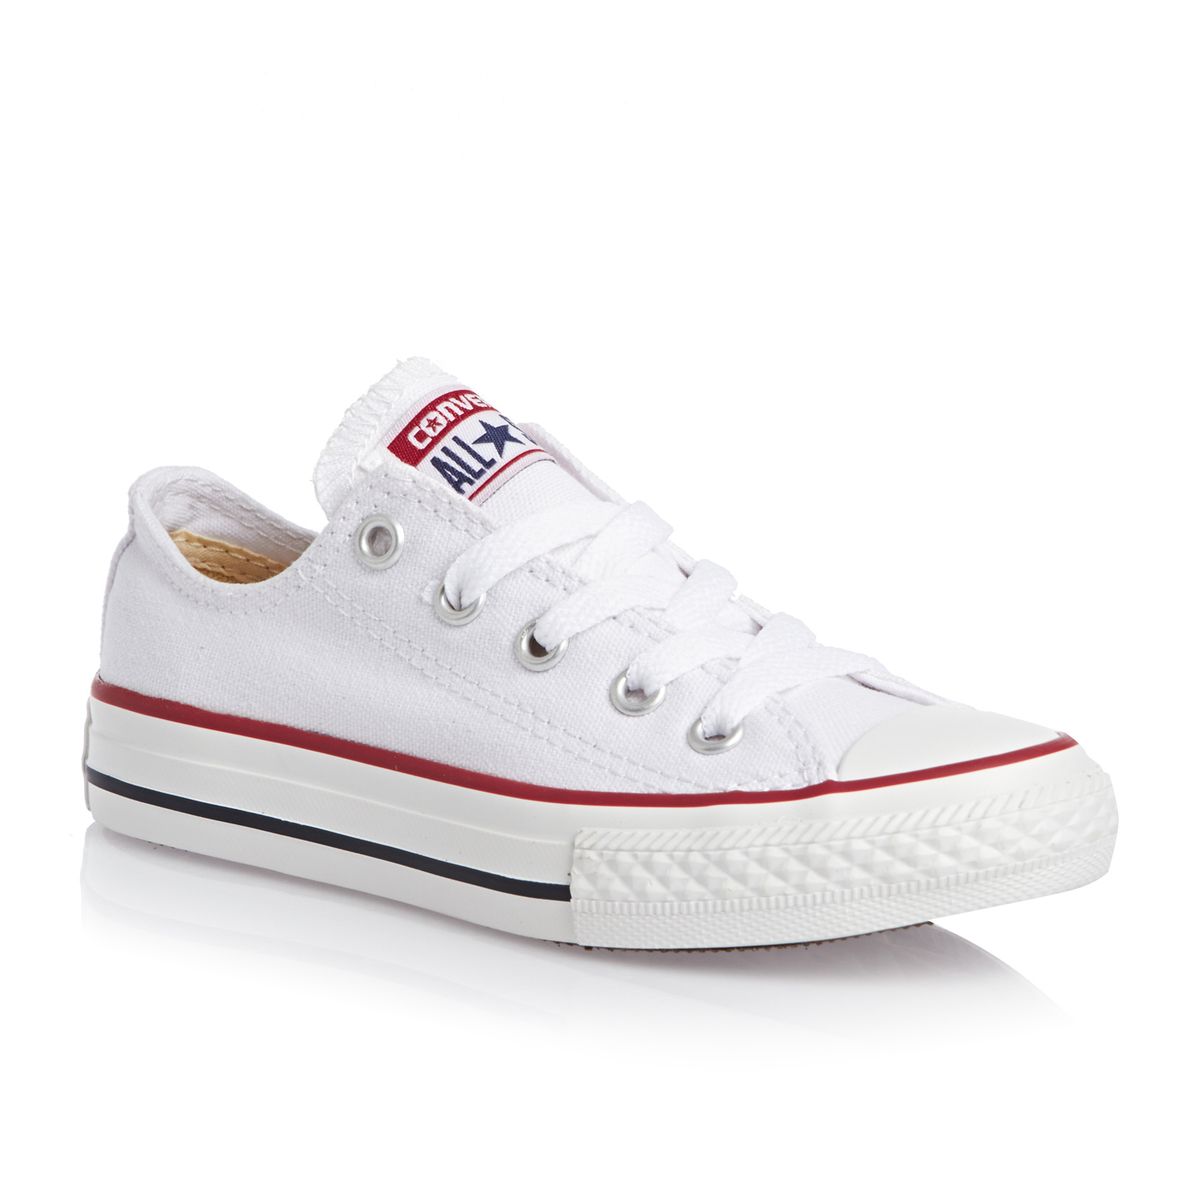 converse shoes in white